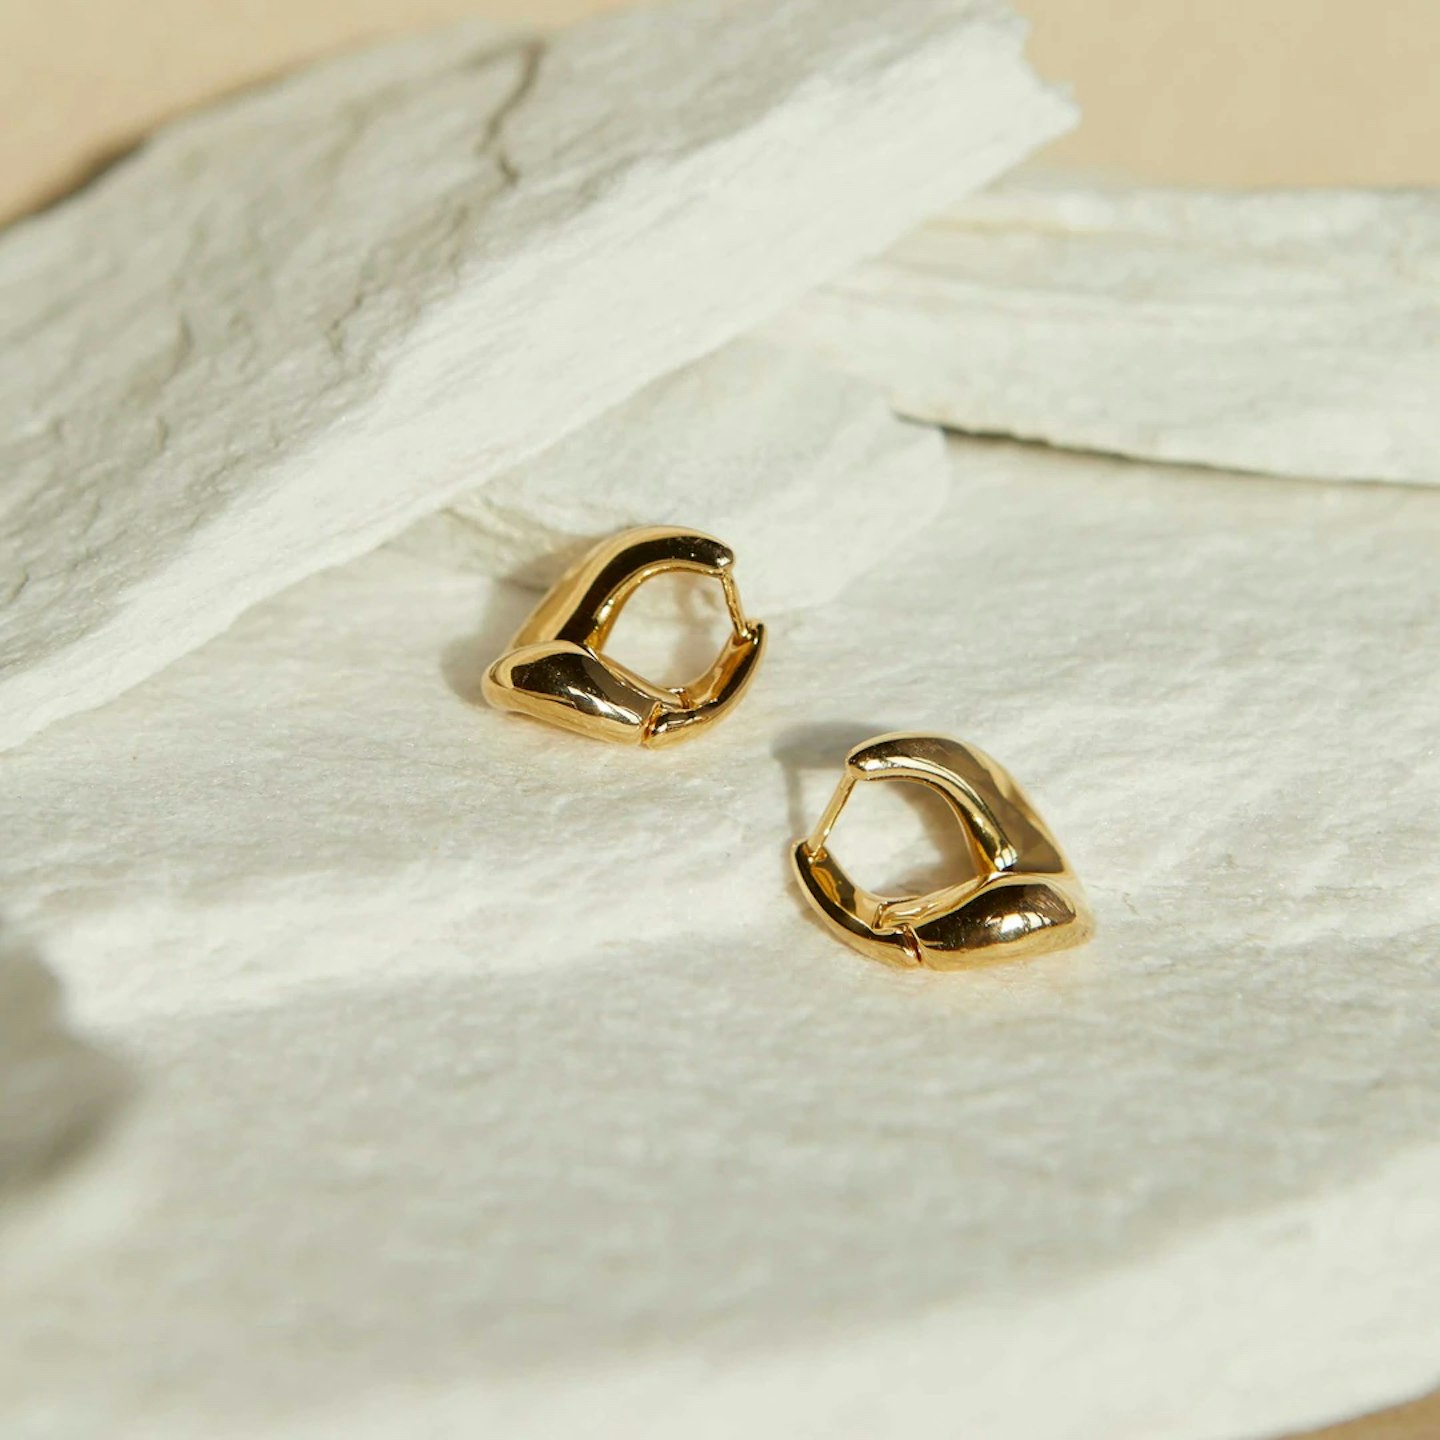 lunchtime shop Tuesday - Astrid & Miyu, Molten Hoops in Gold, £69